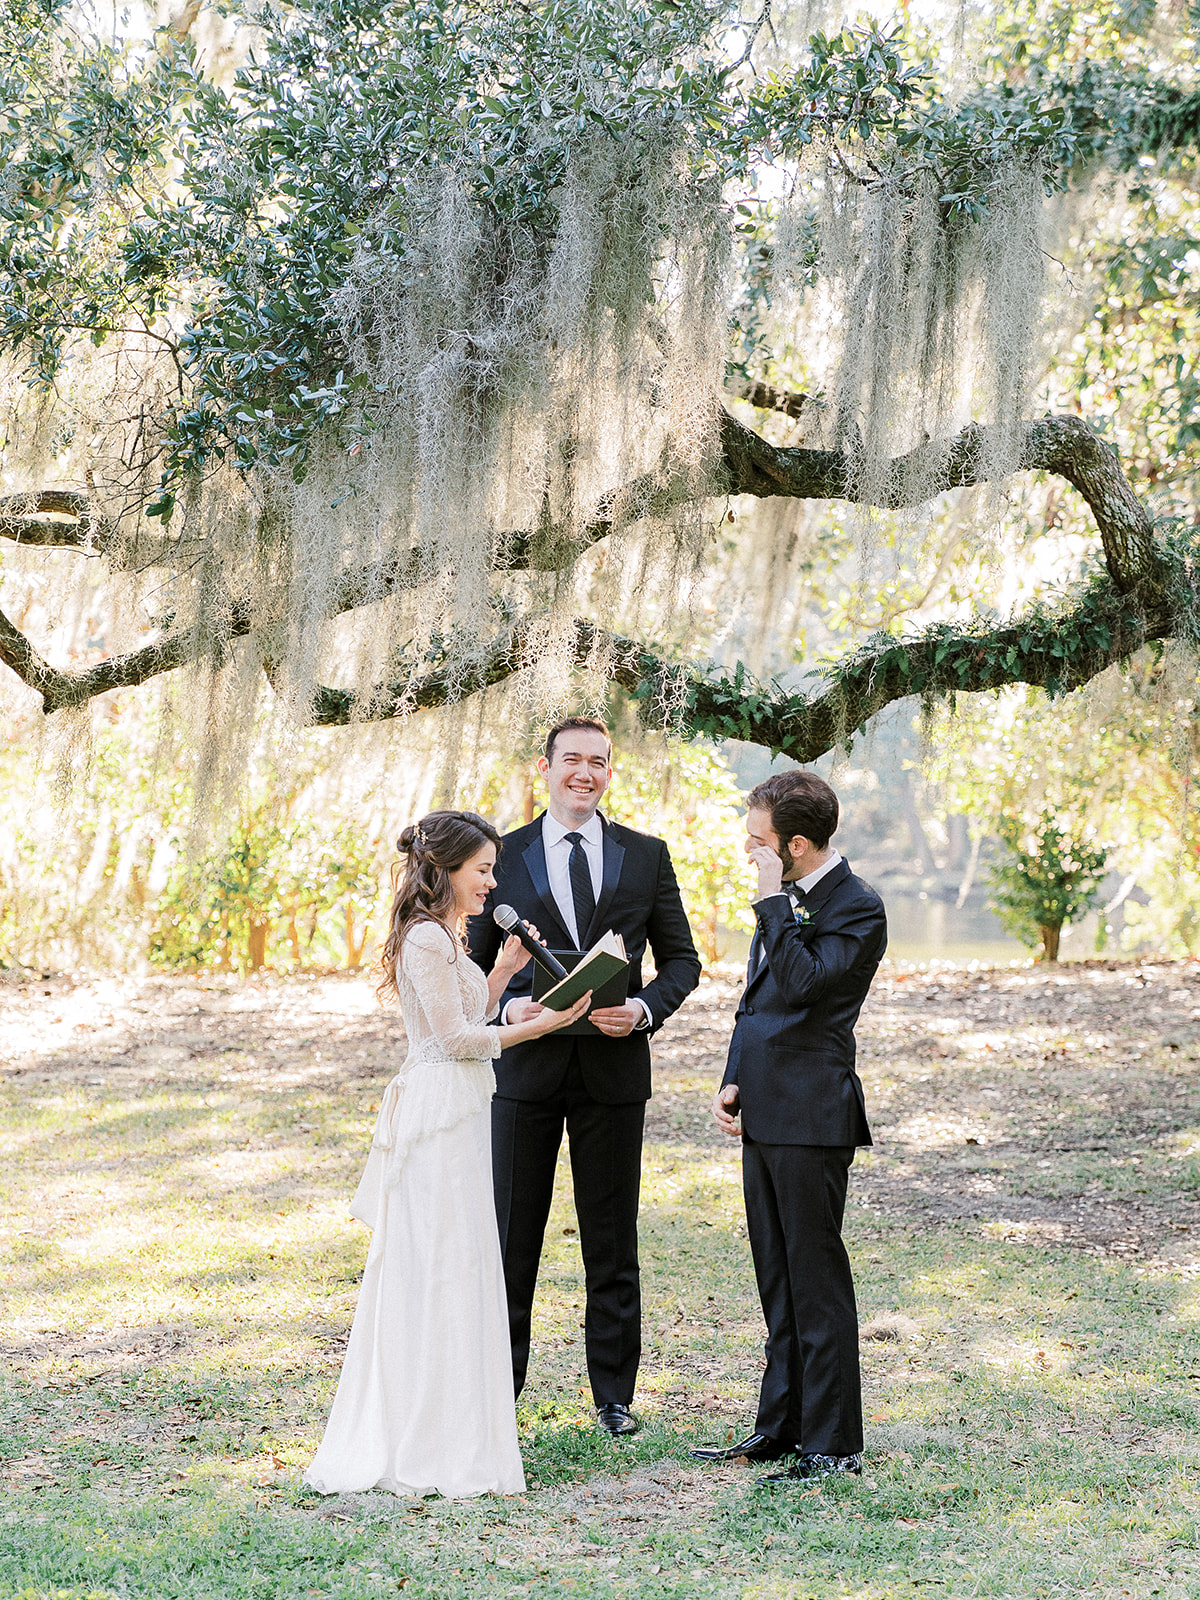 Winter wedding in Charleston with a vintage inspired wedding dress and black groom tux, designed by destination wedding planner Willow and Oak Events and captured by Kylee Yee Photography